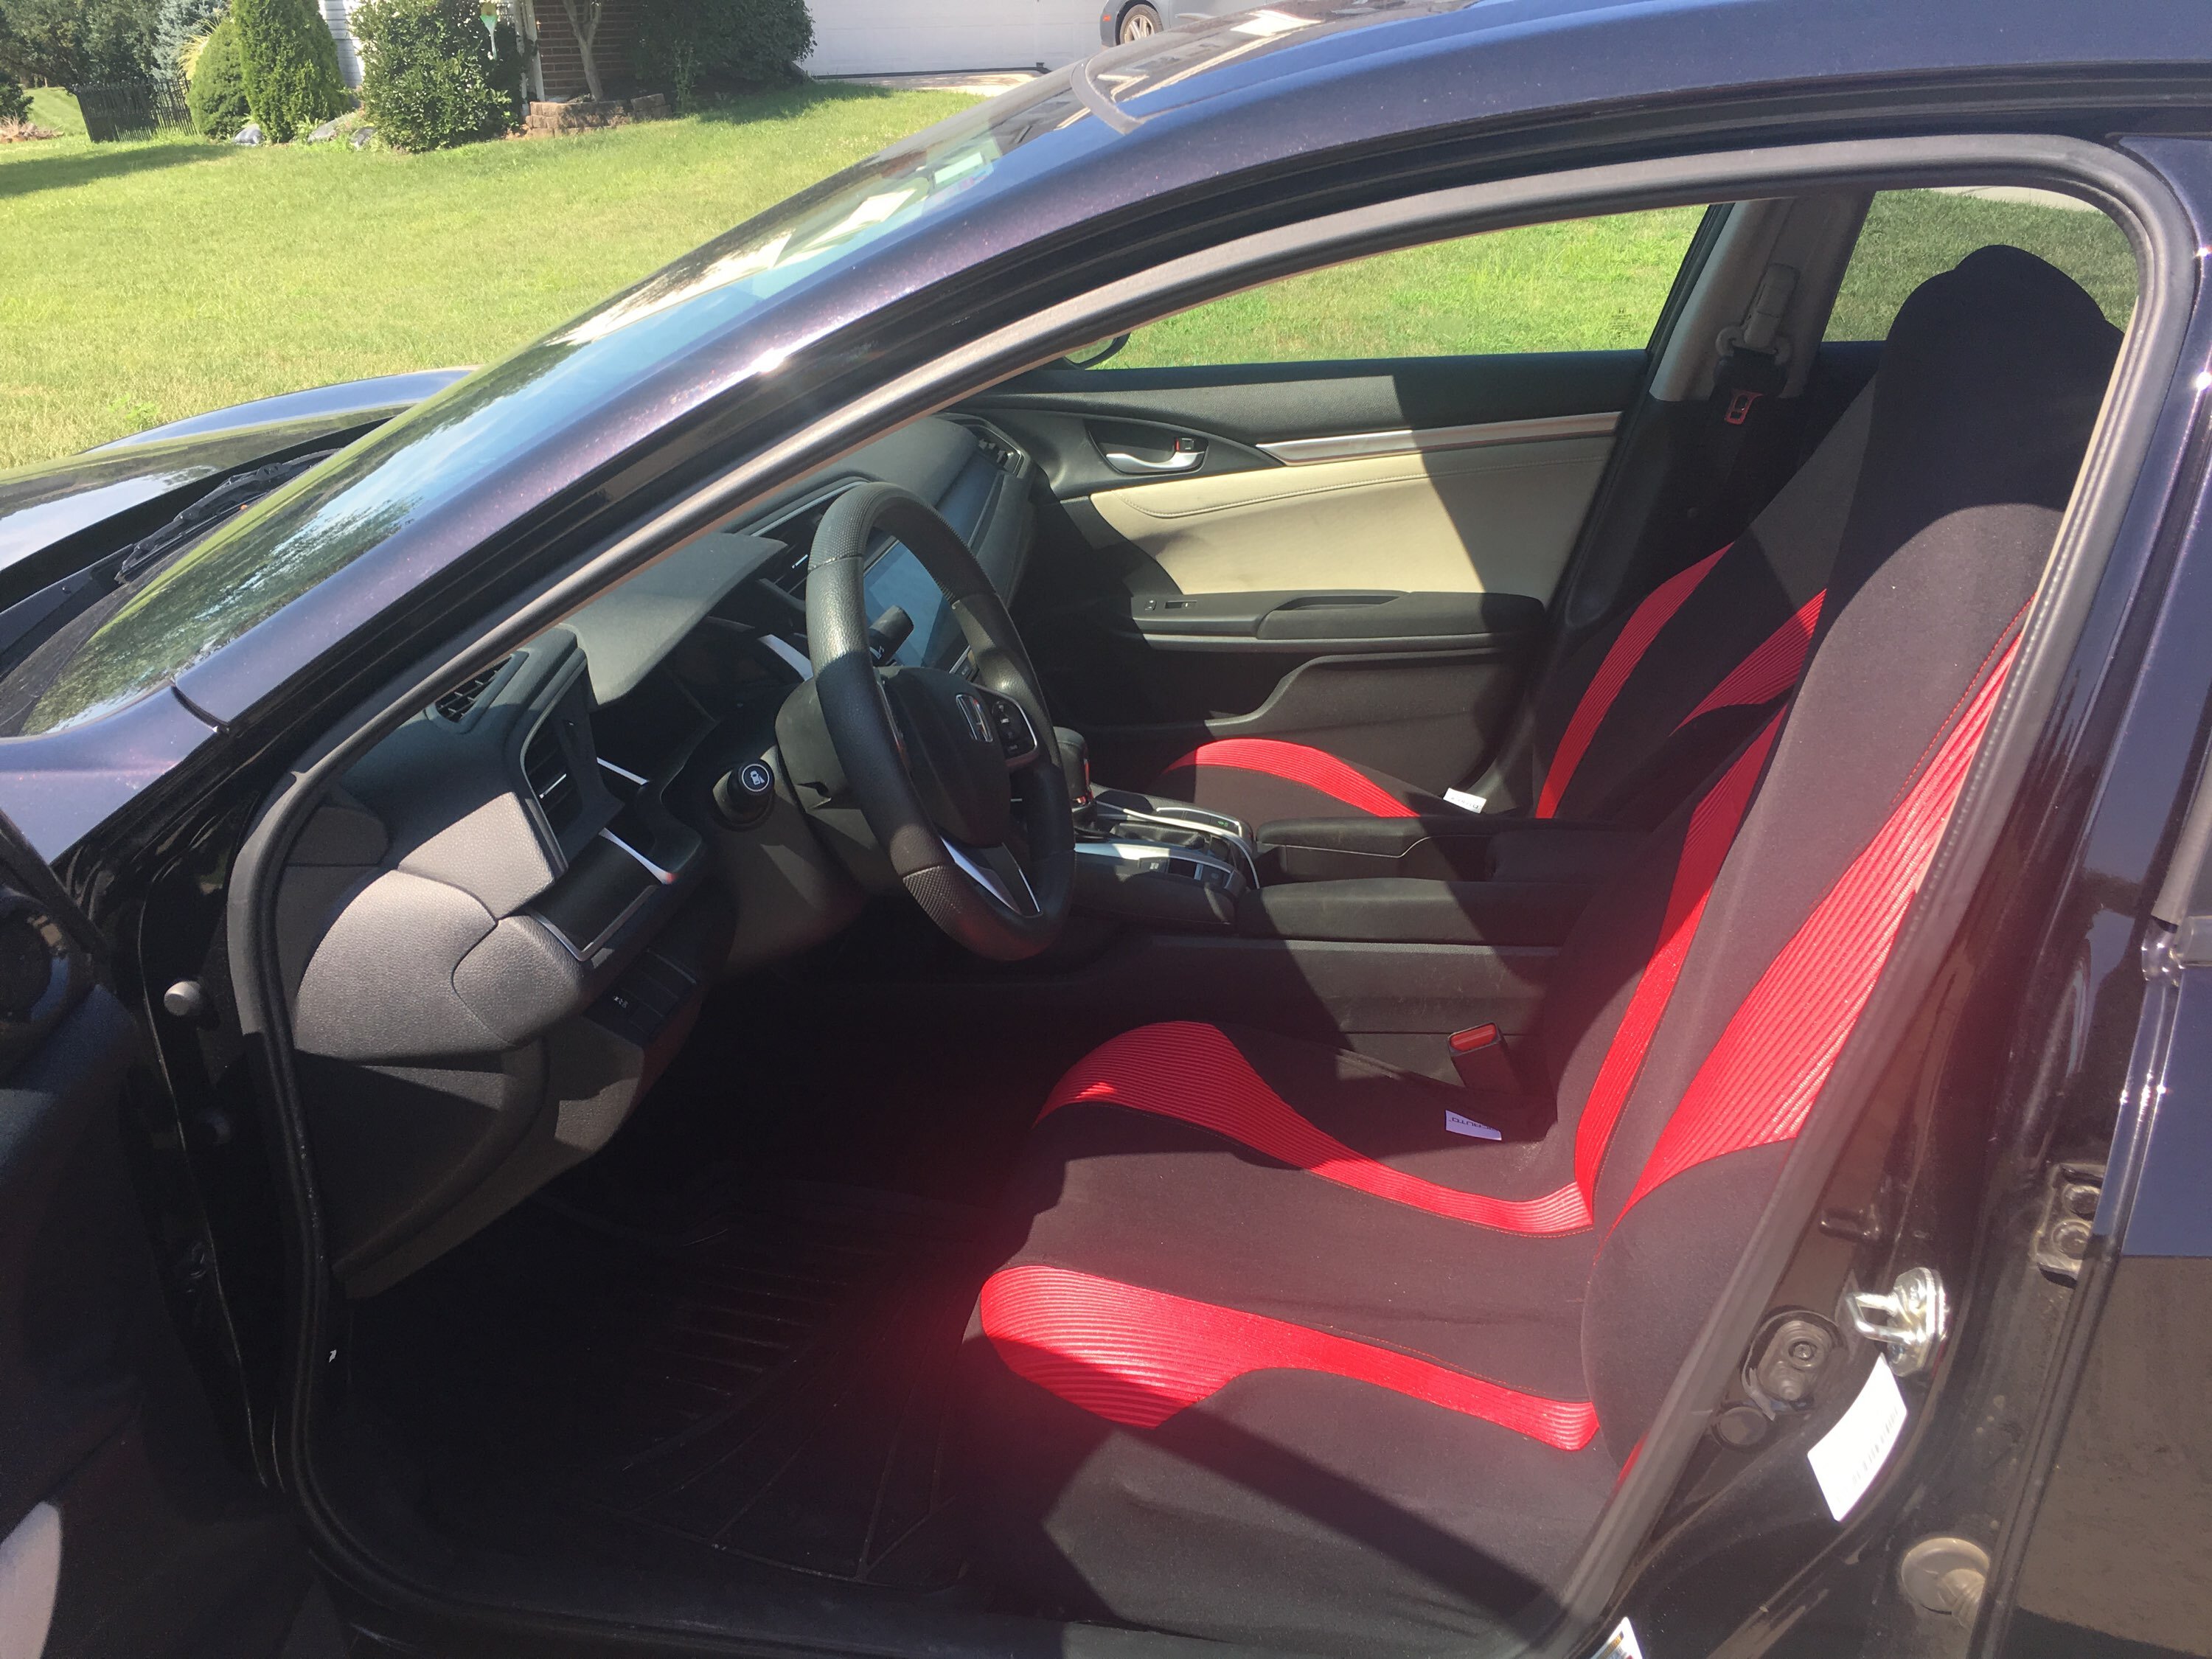 My Honda Civic shown with red and black seat covers